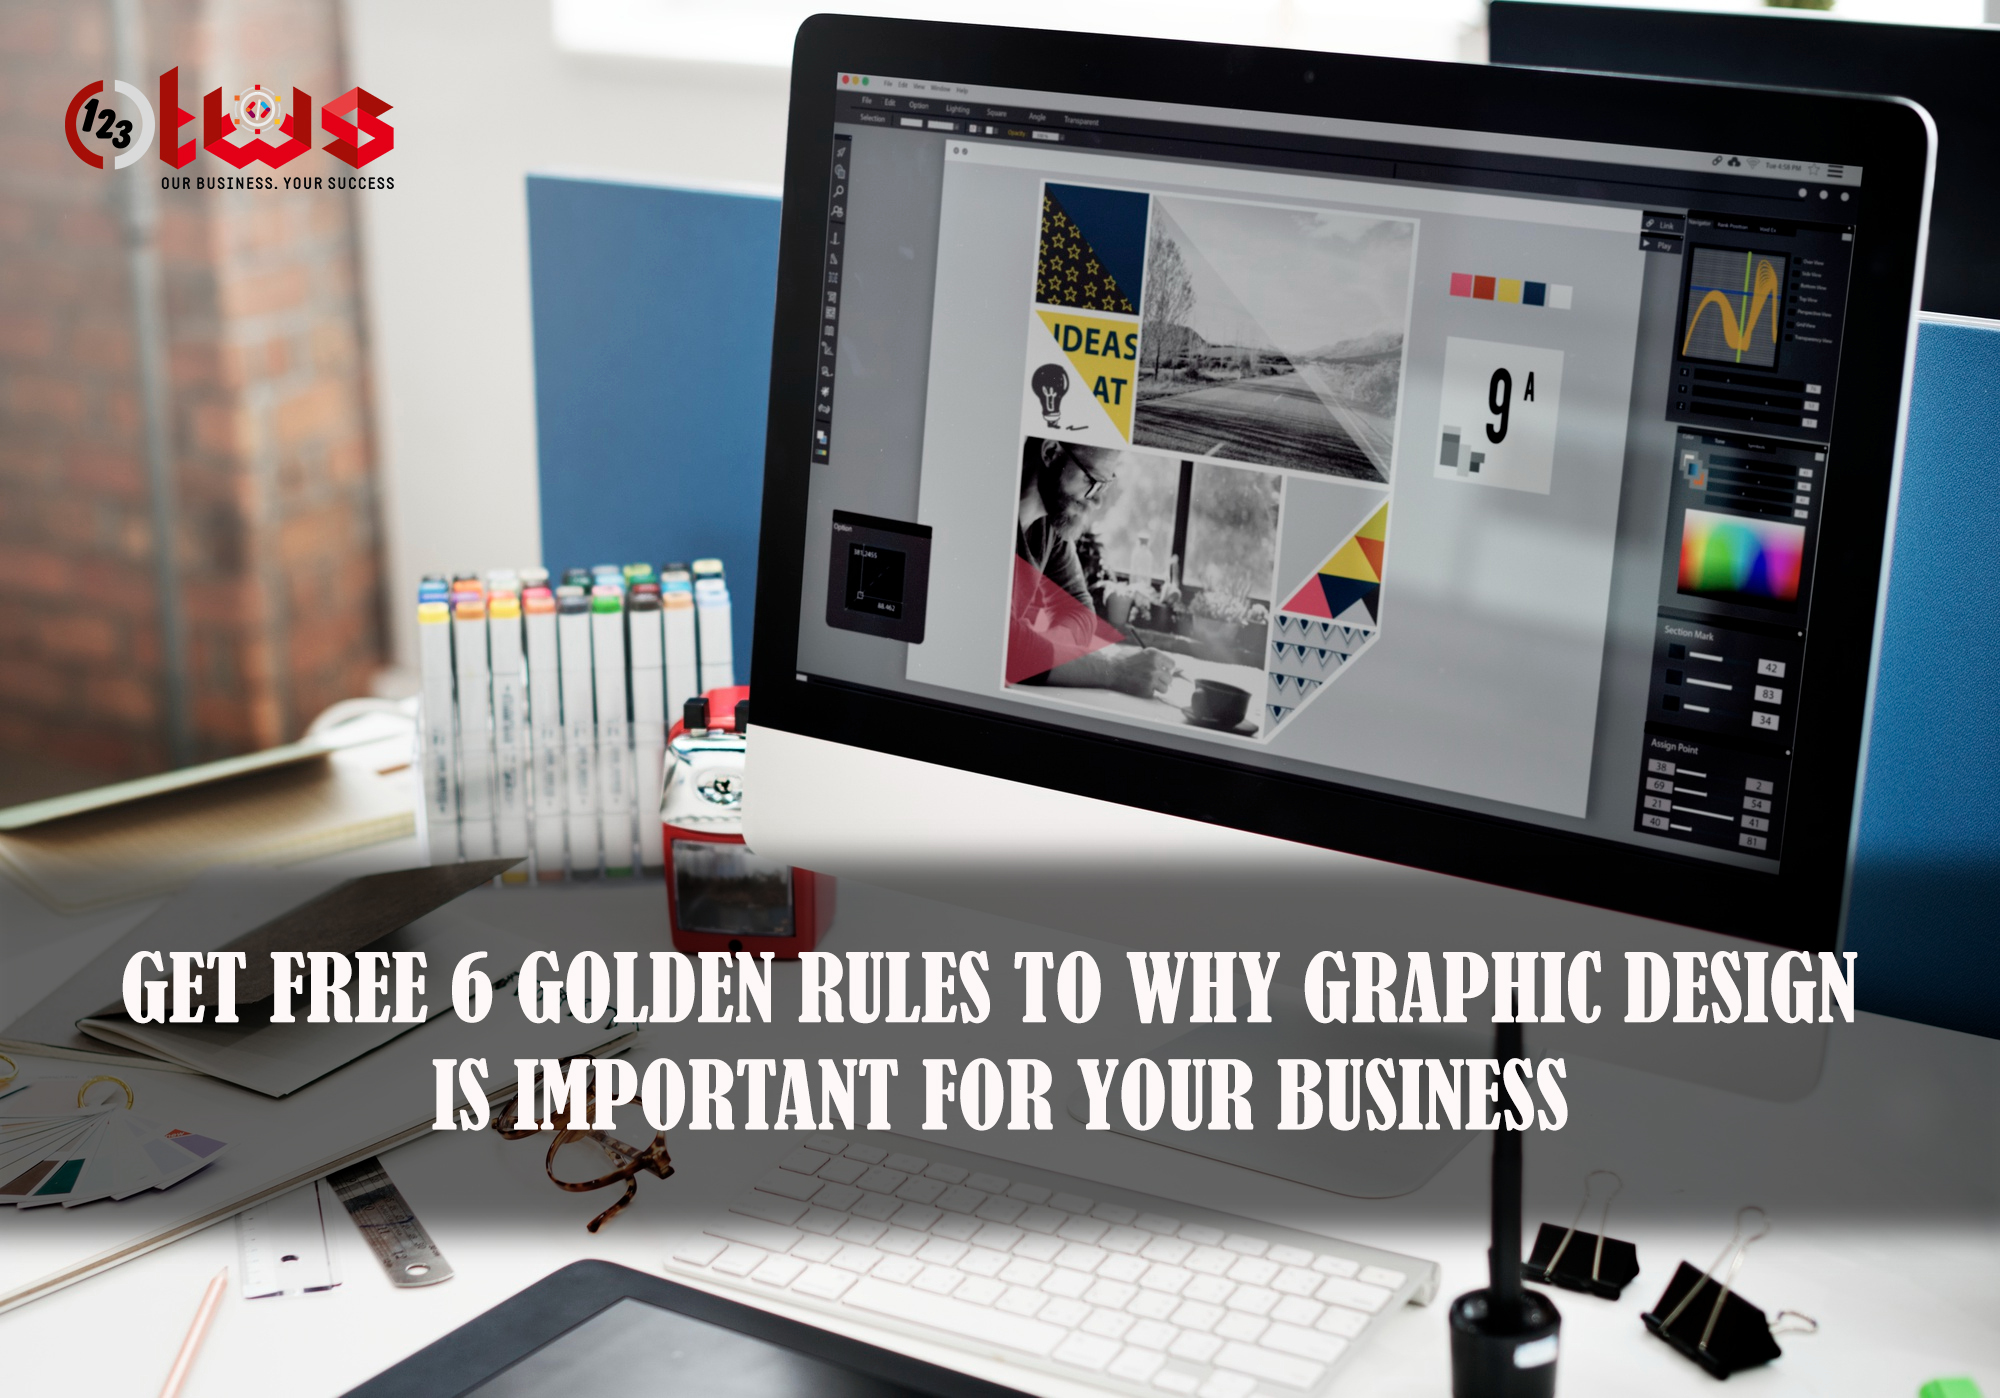 Get FREE 6 Golden Rules to why Graphic Design is important for your Business?